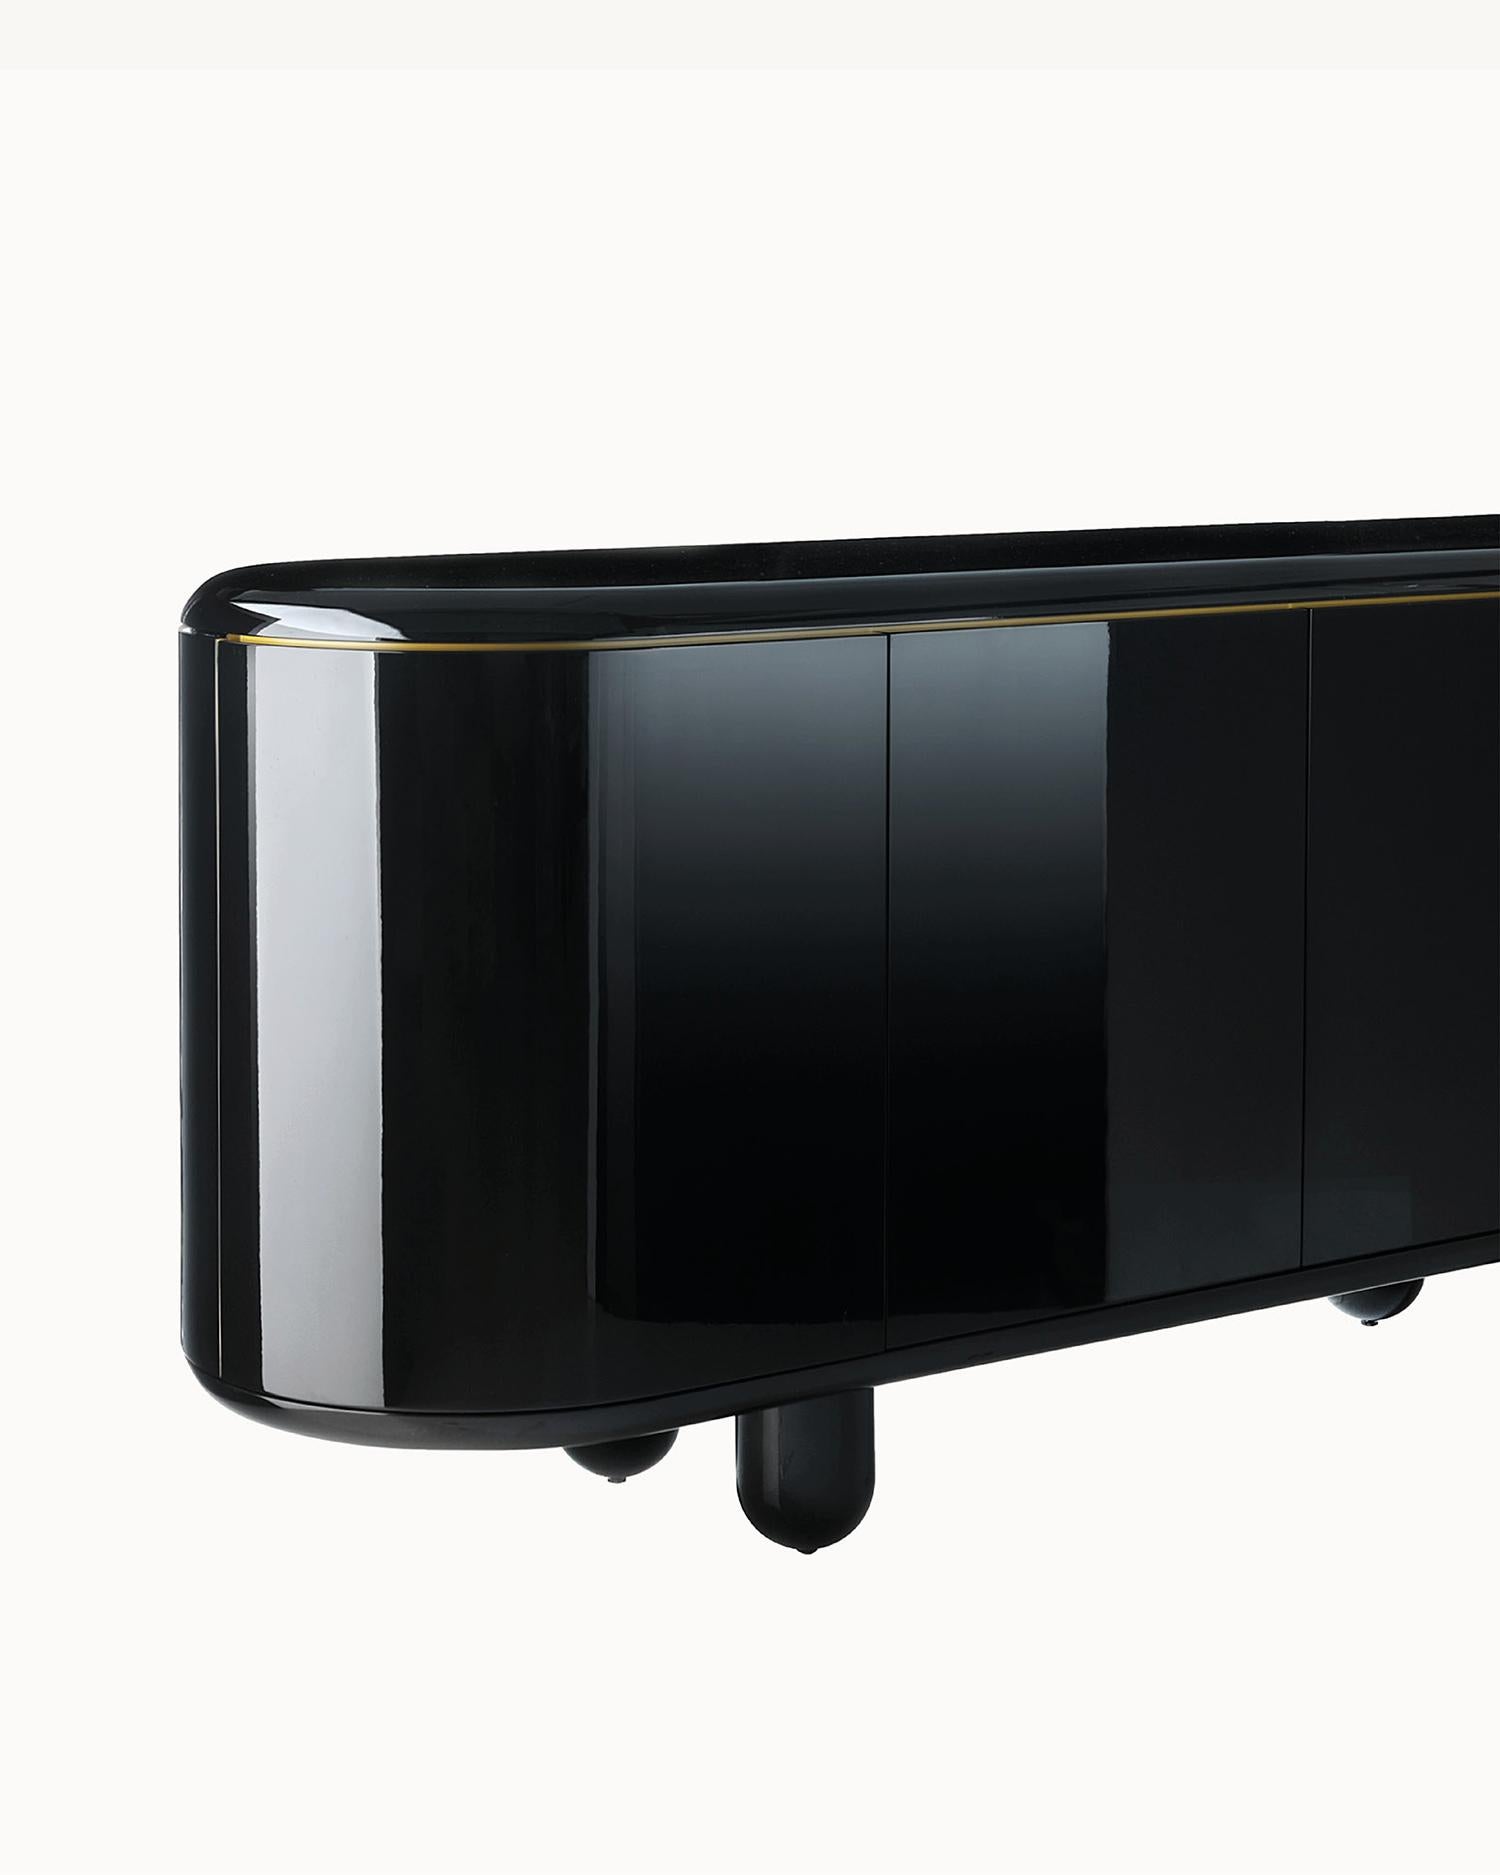 Organic Modern Contemporary black, yellow lacquered wood sideboard with shelves by Jaime Hayon  For Sale